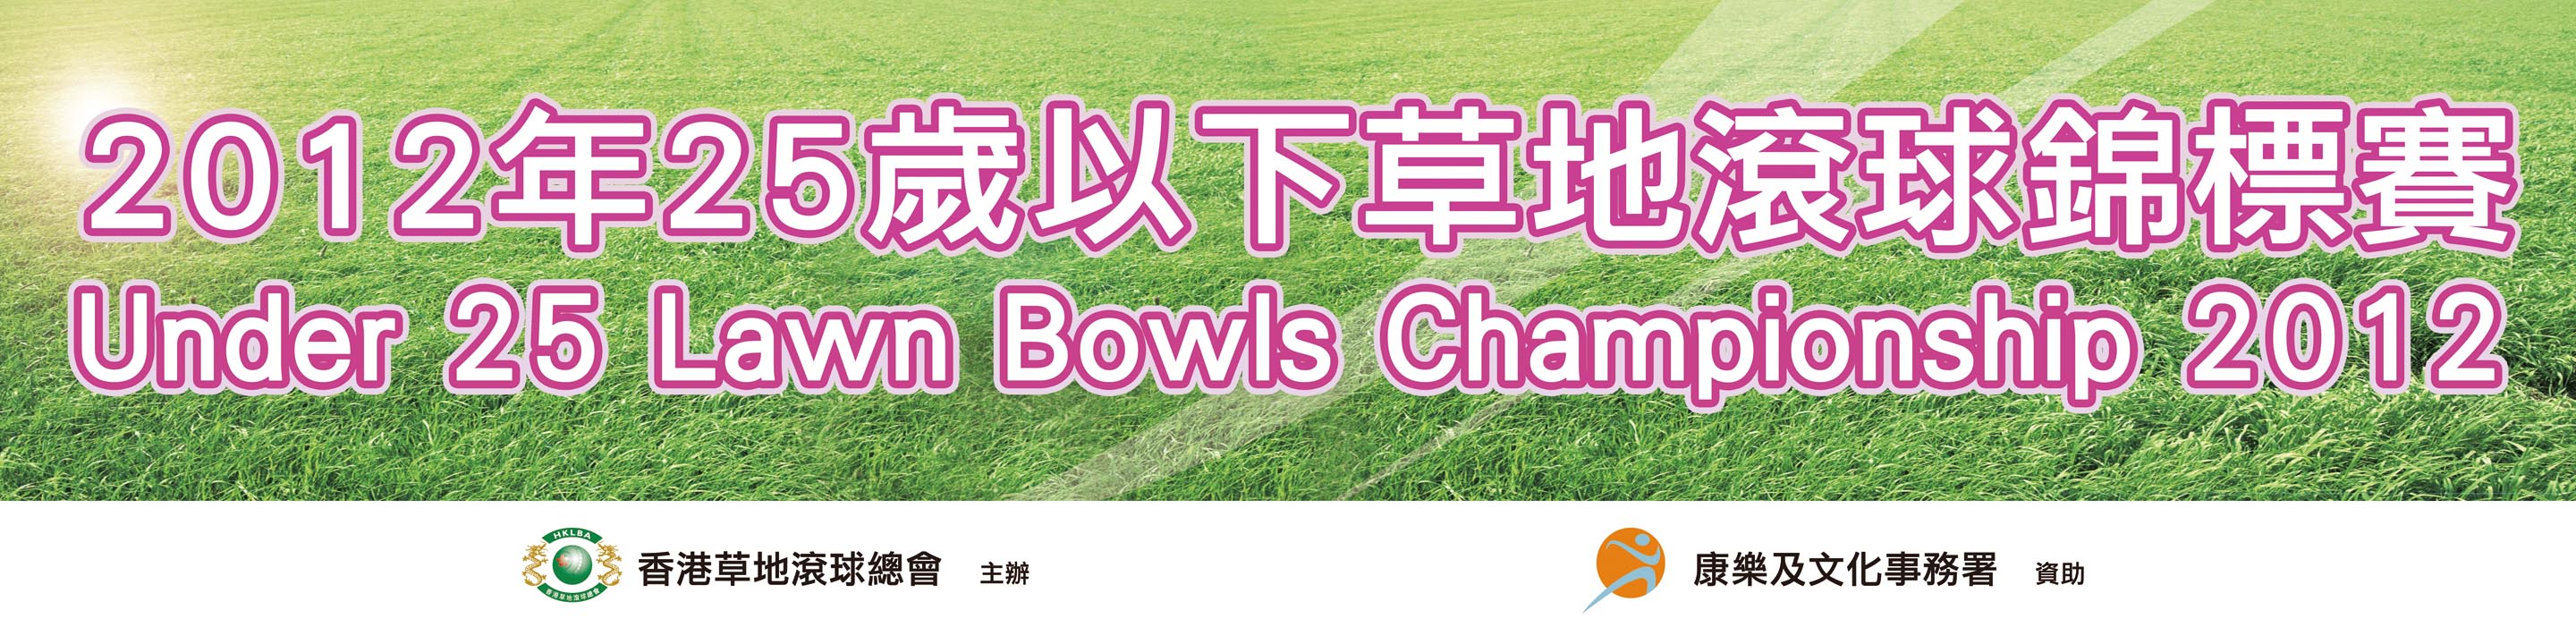 Under 25 Lawn Bowls Championship 2012 (Updated on 12/12/12)